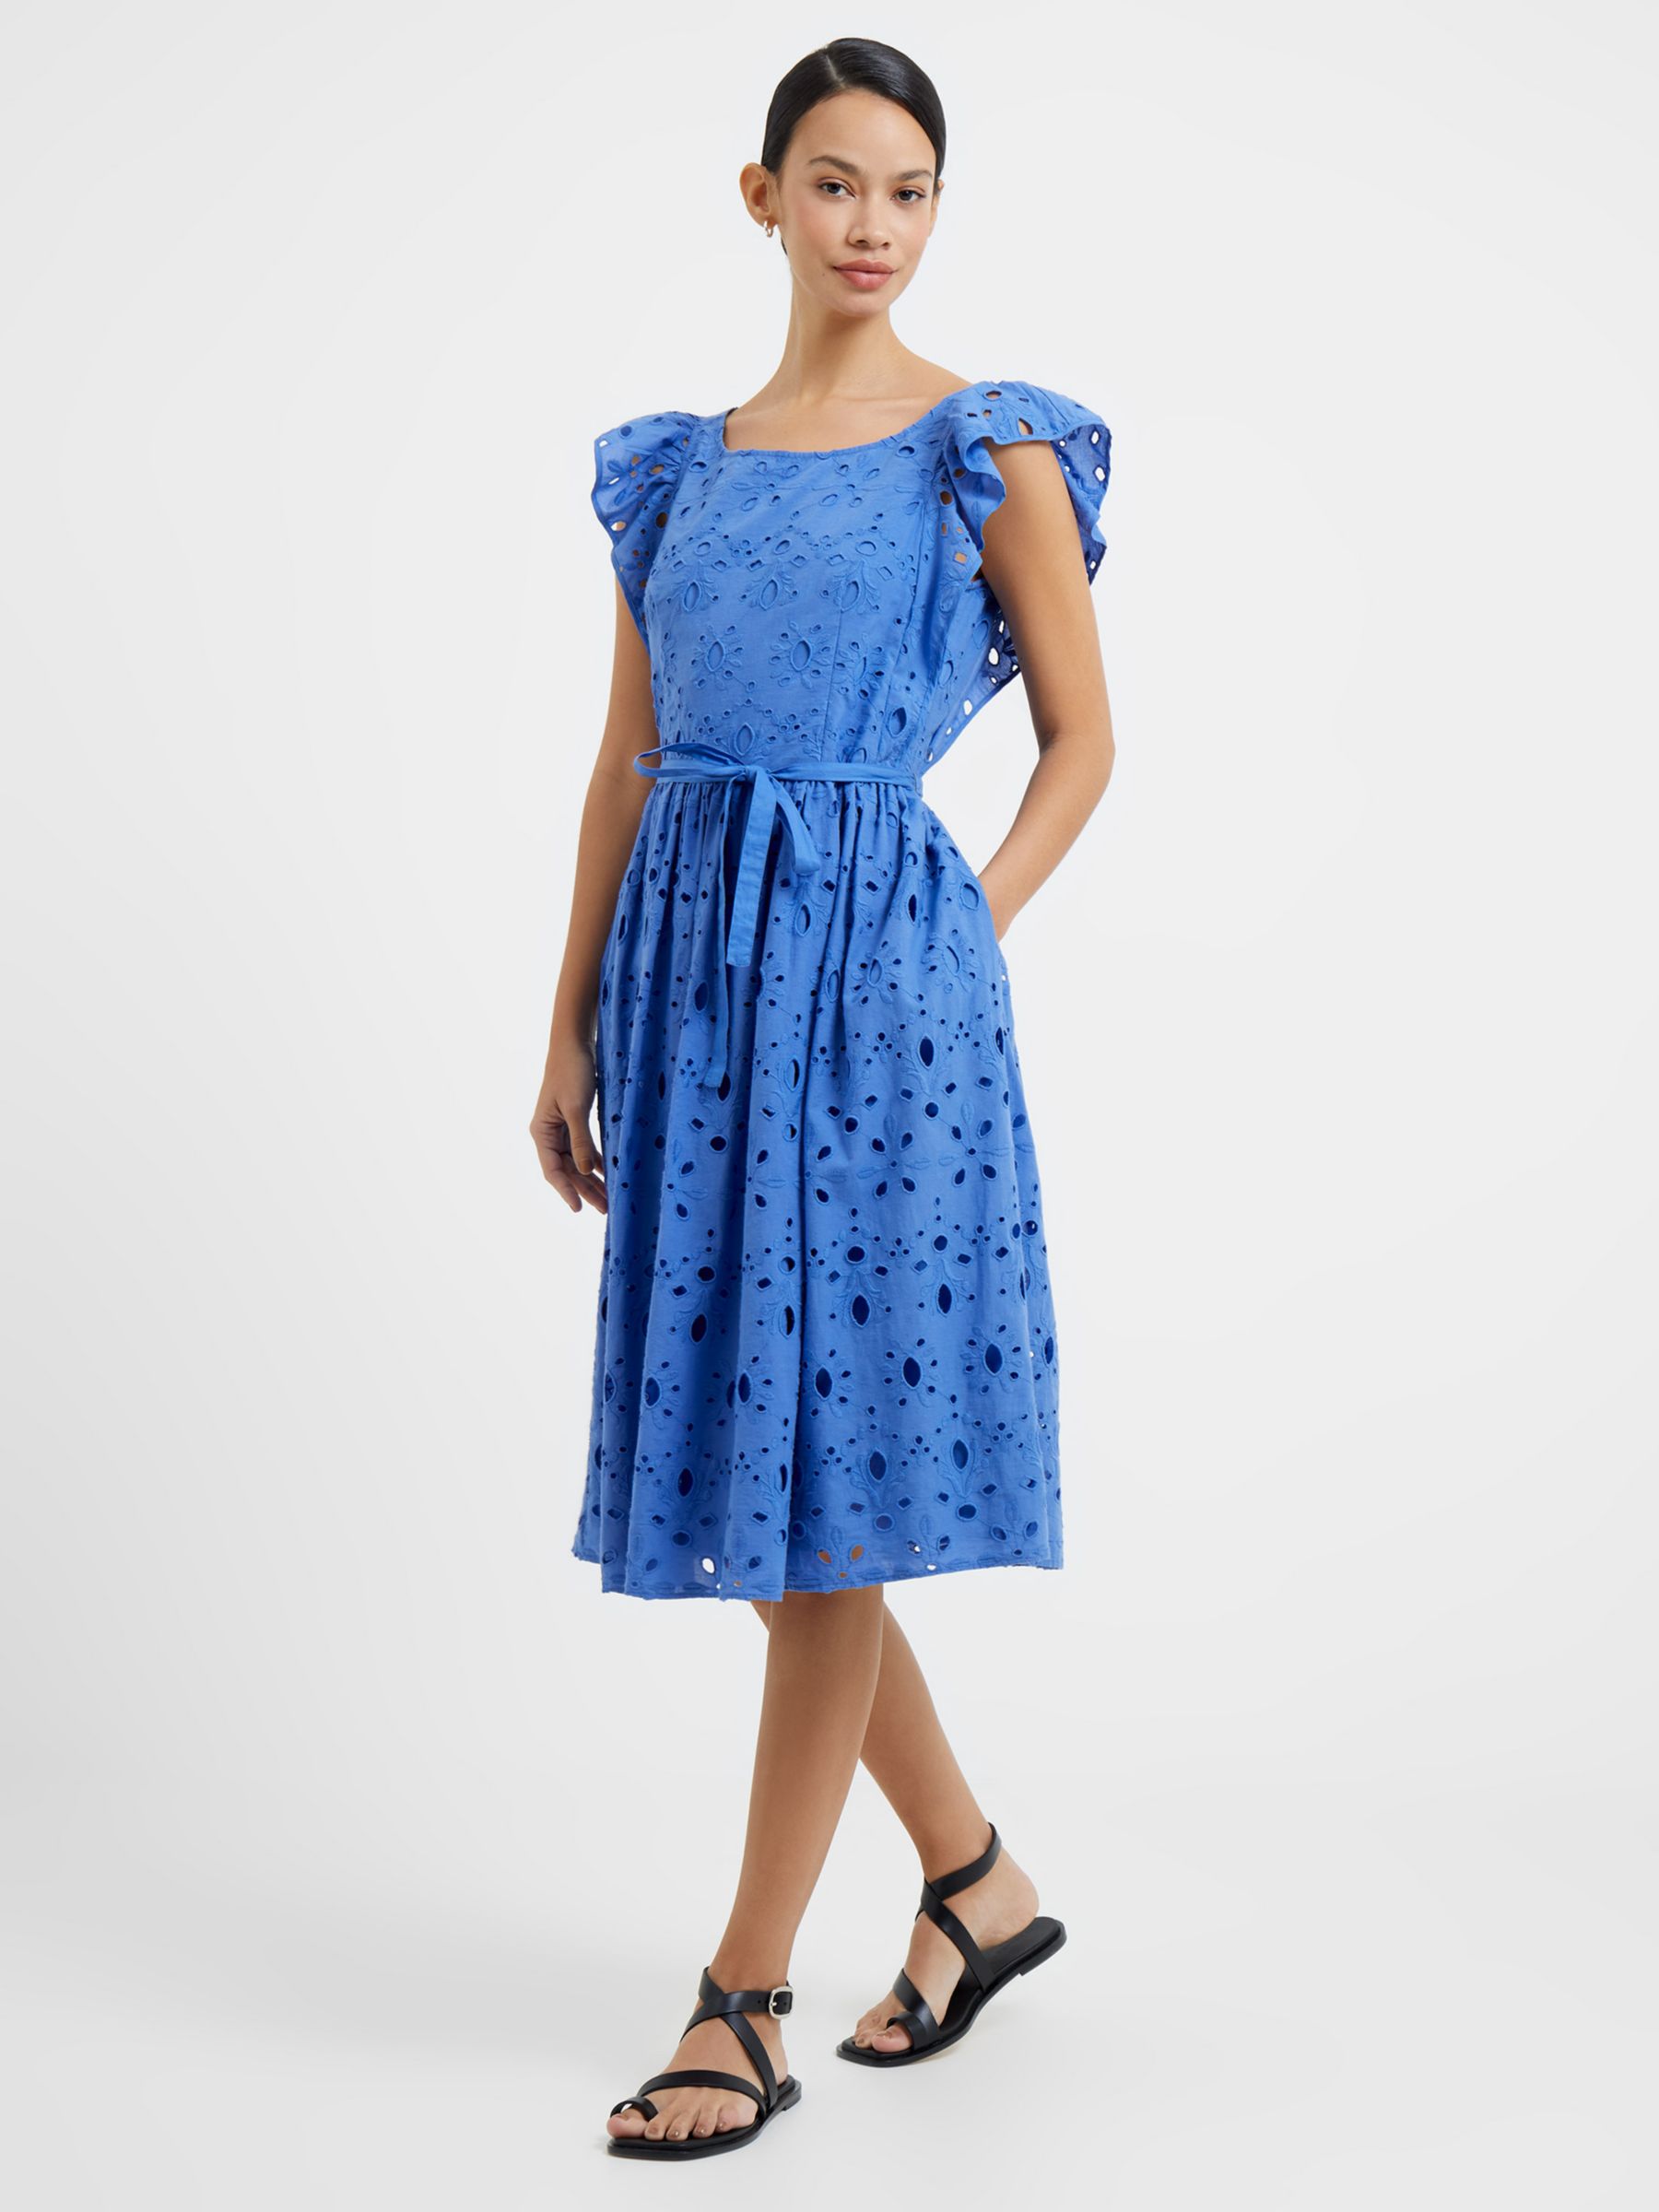 French Connection Cilla Broderie Anglaise Dress, Baja Blue, 16